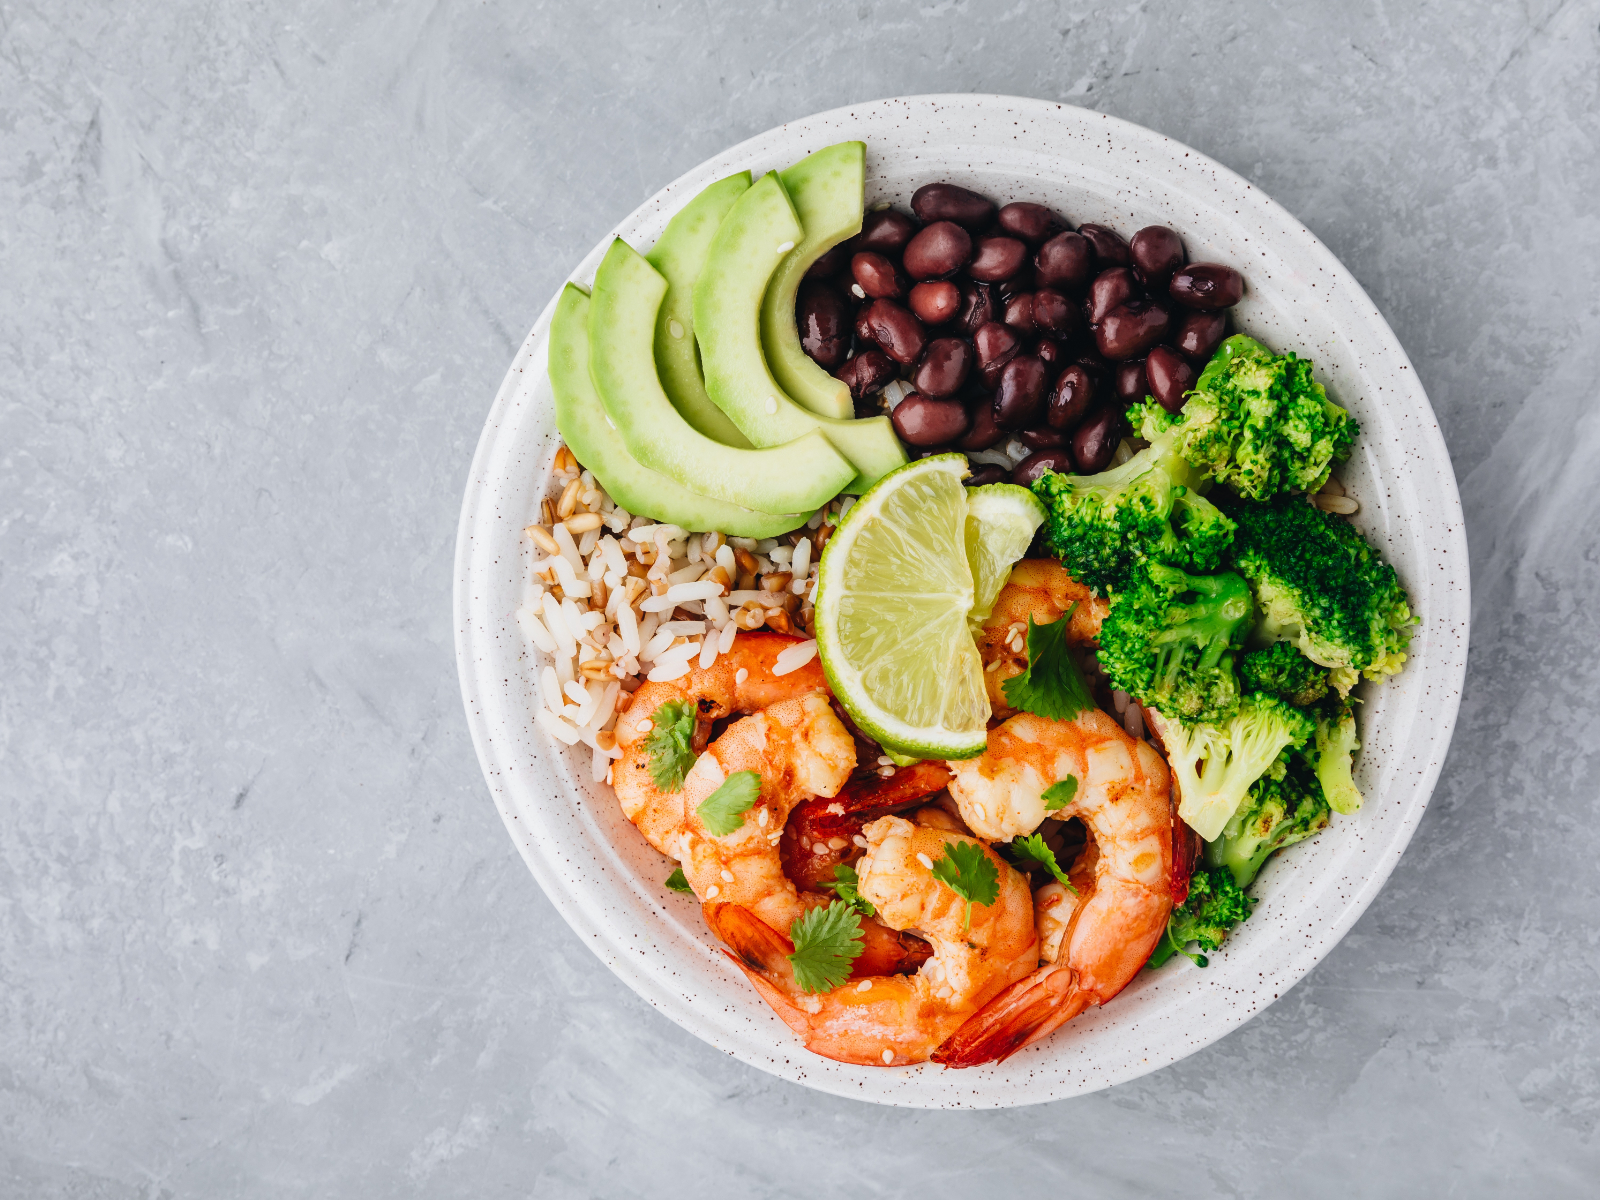 grilled shrimp bowl with broccoli black beans brown rice and avocado